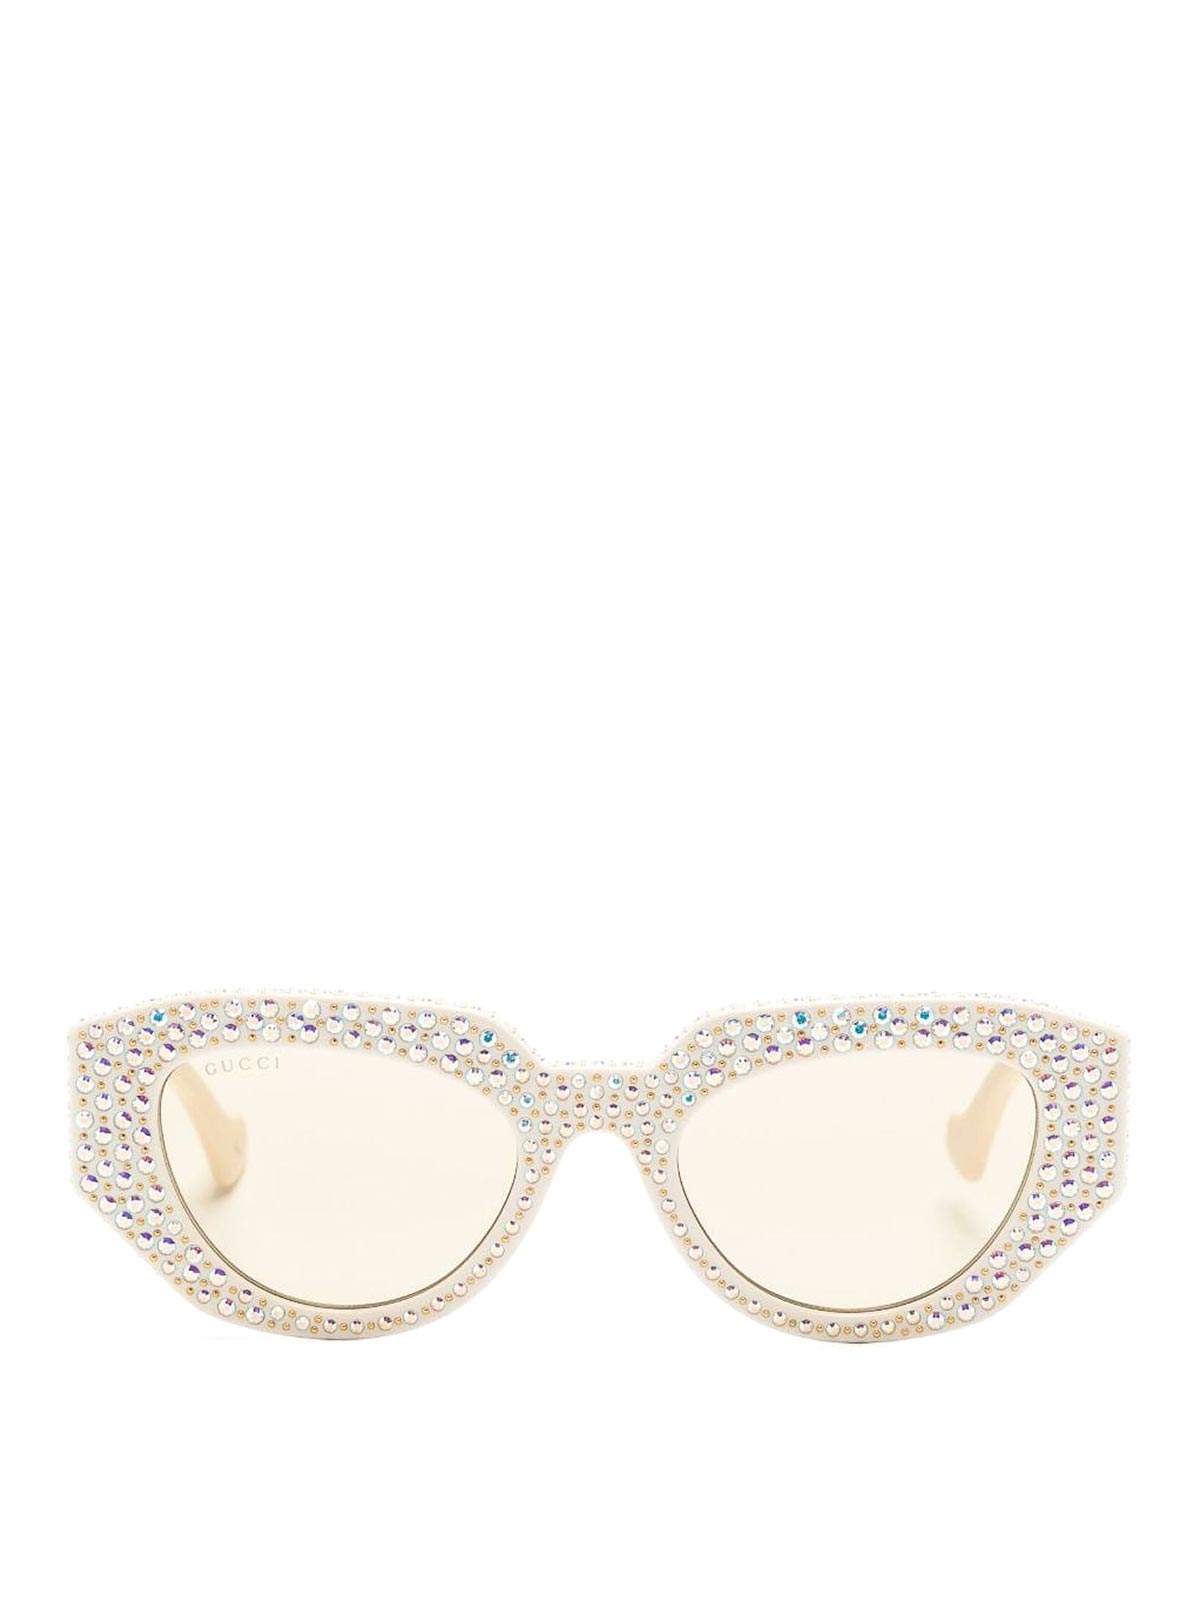 Gucci Eyeglasses In White